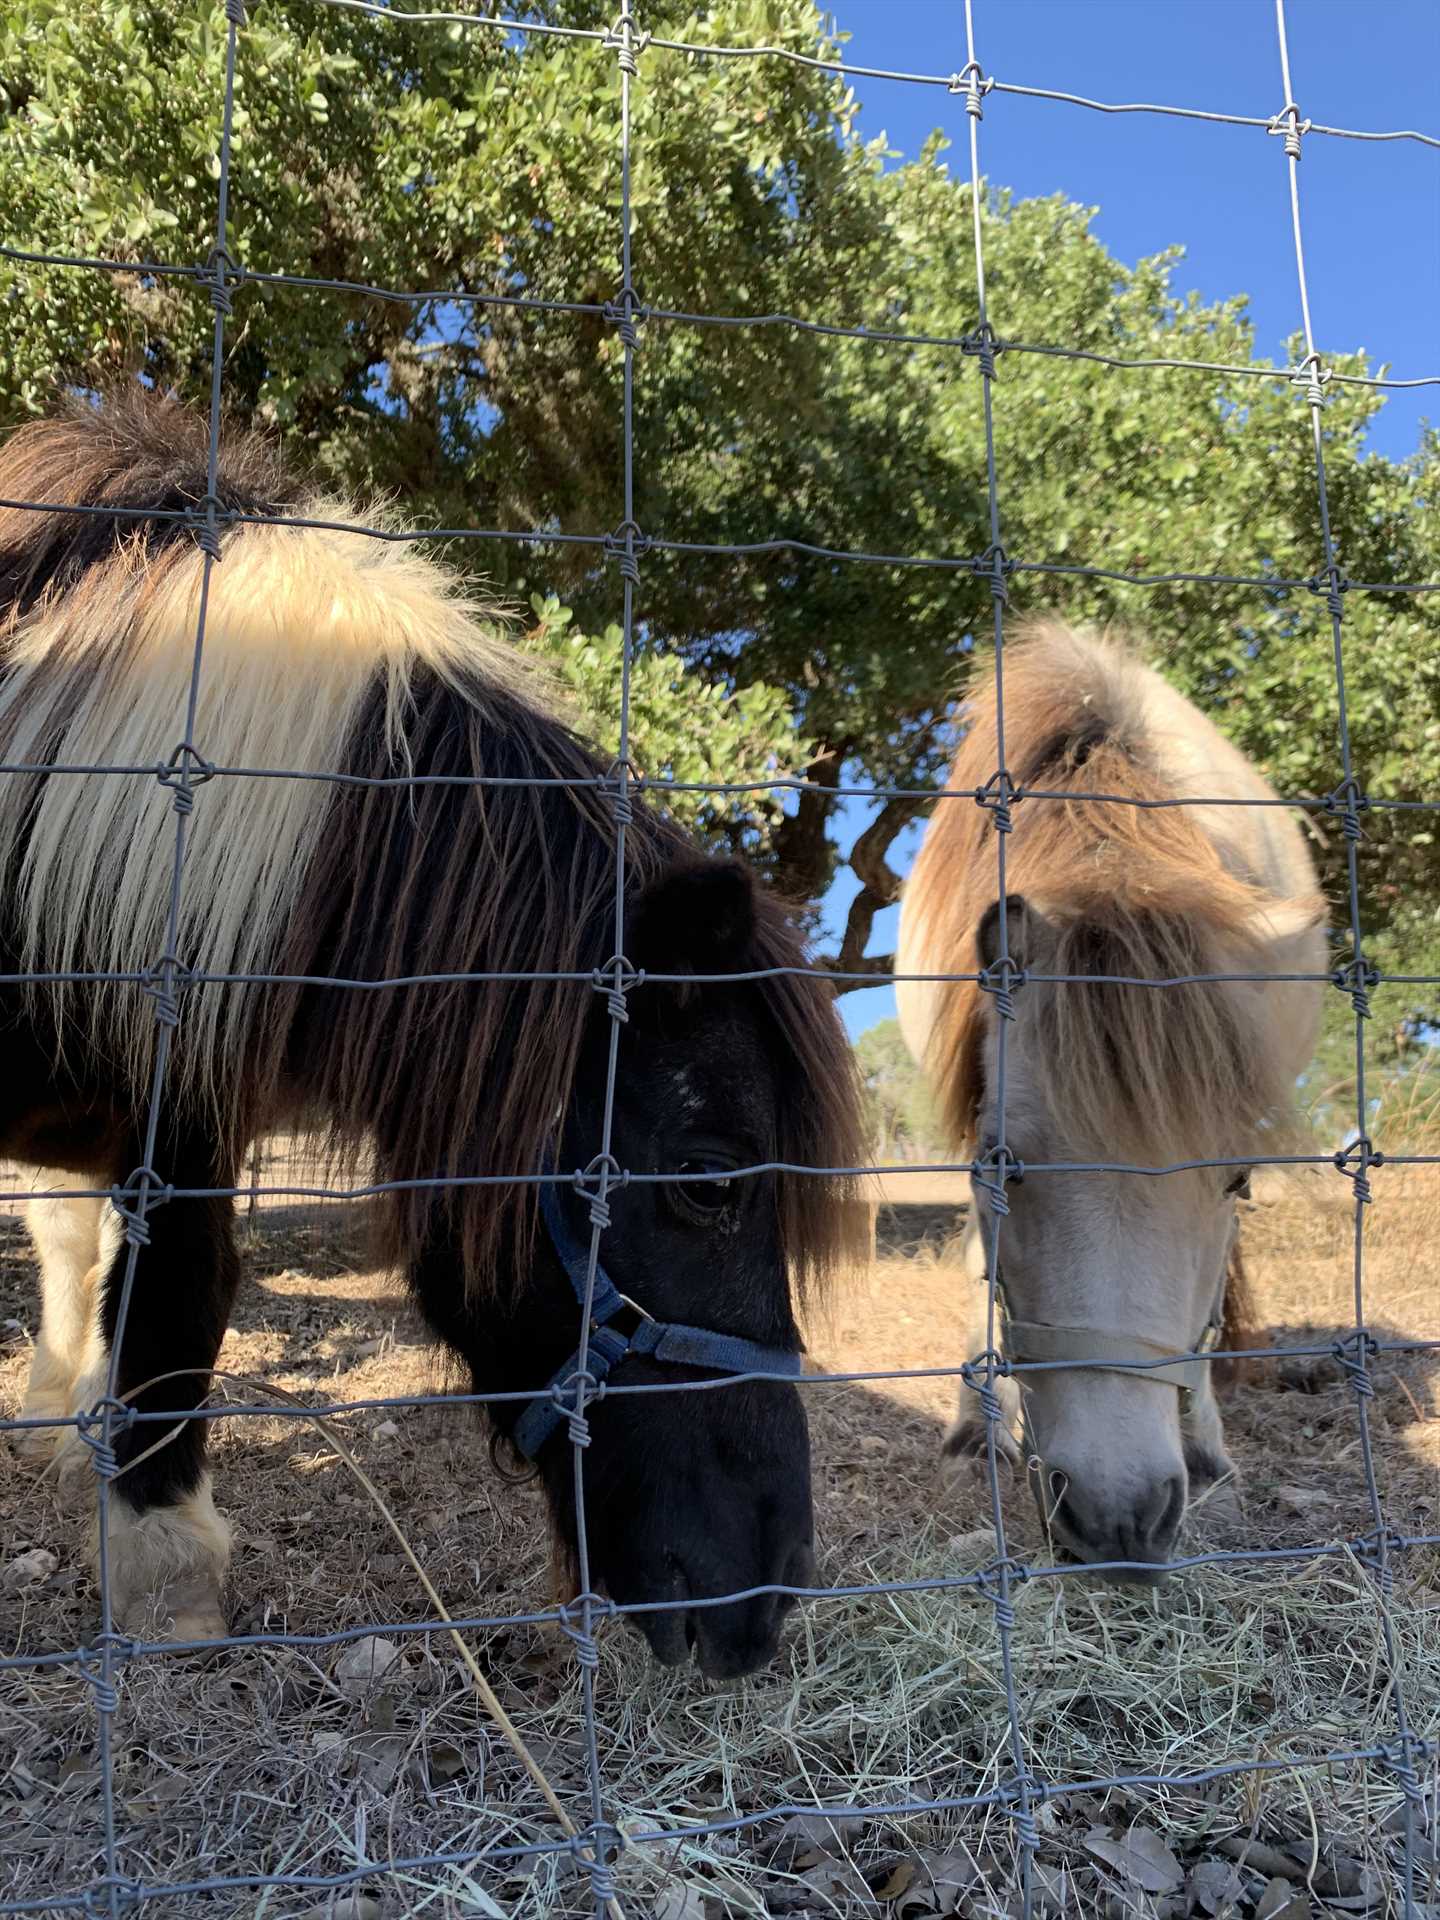                                                 Feel free to say hello to the friendly miniature (and regular-sized) horses at the ranch!